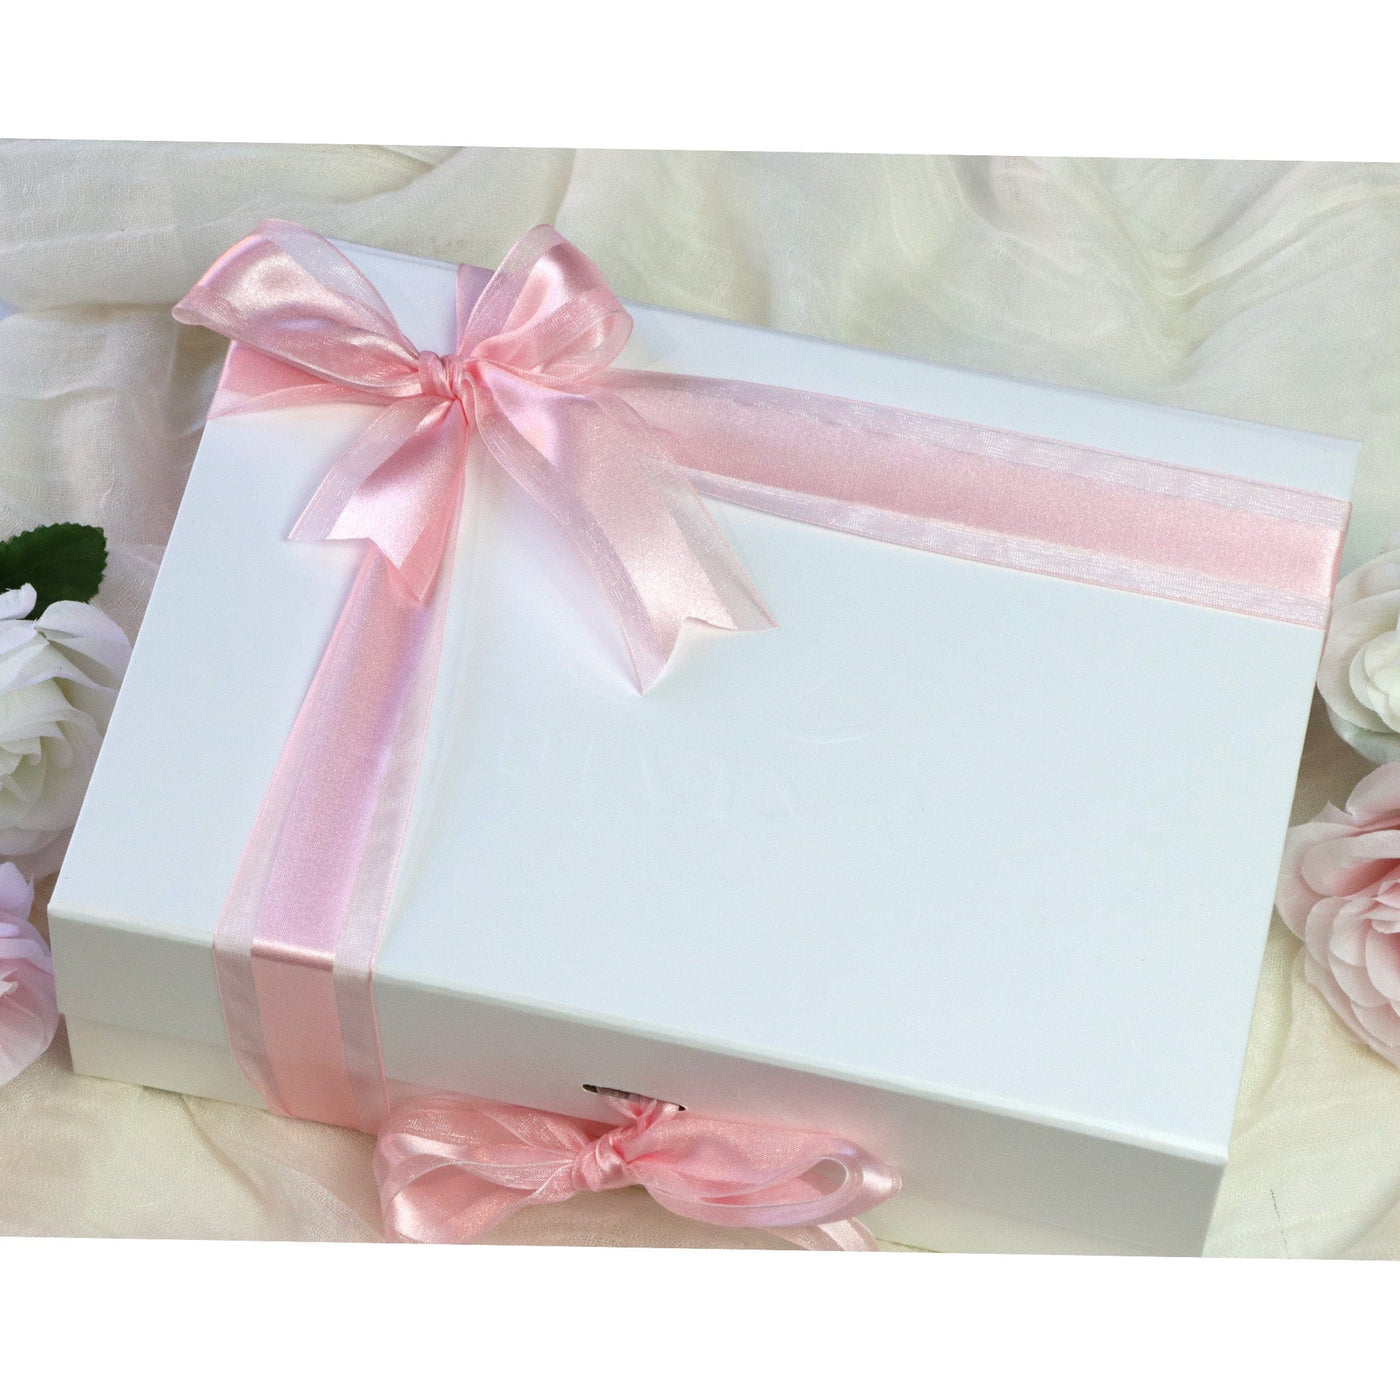 Luxury Hand Soap and Lotion Gift Set - Mother's day